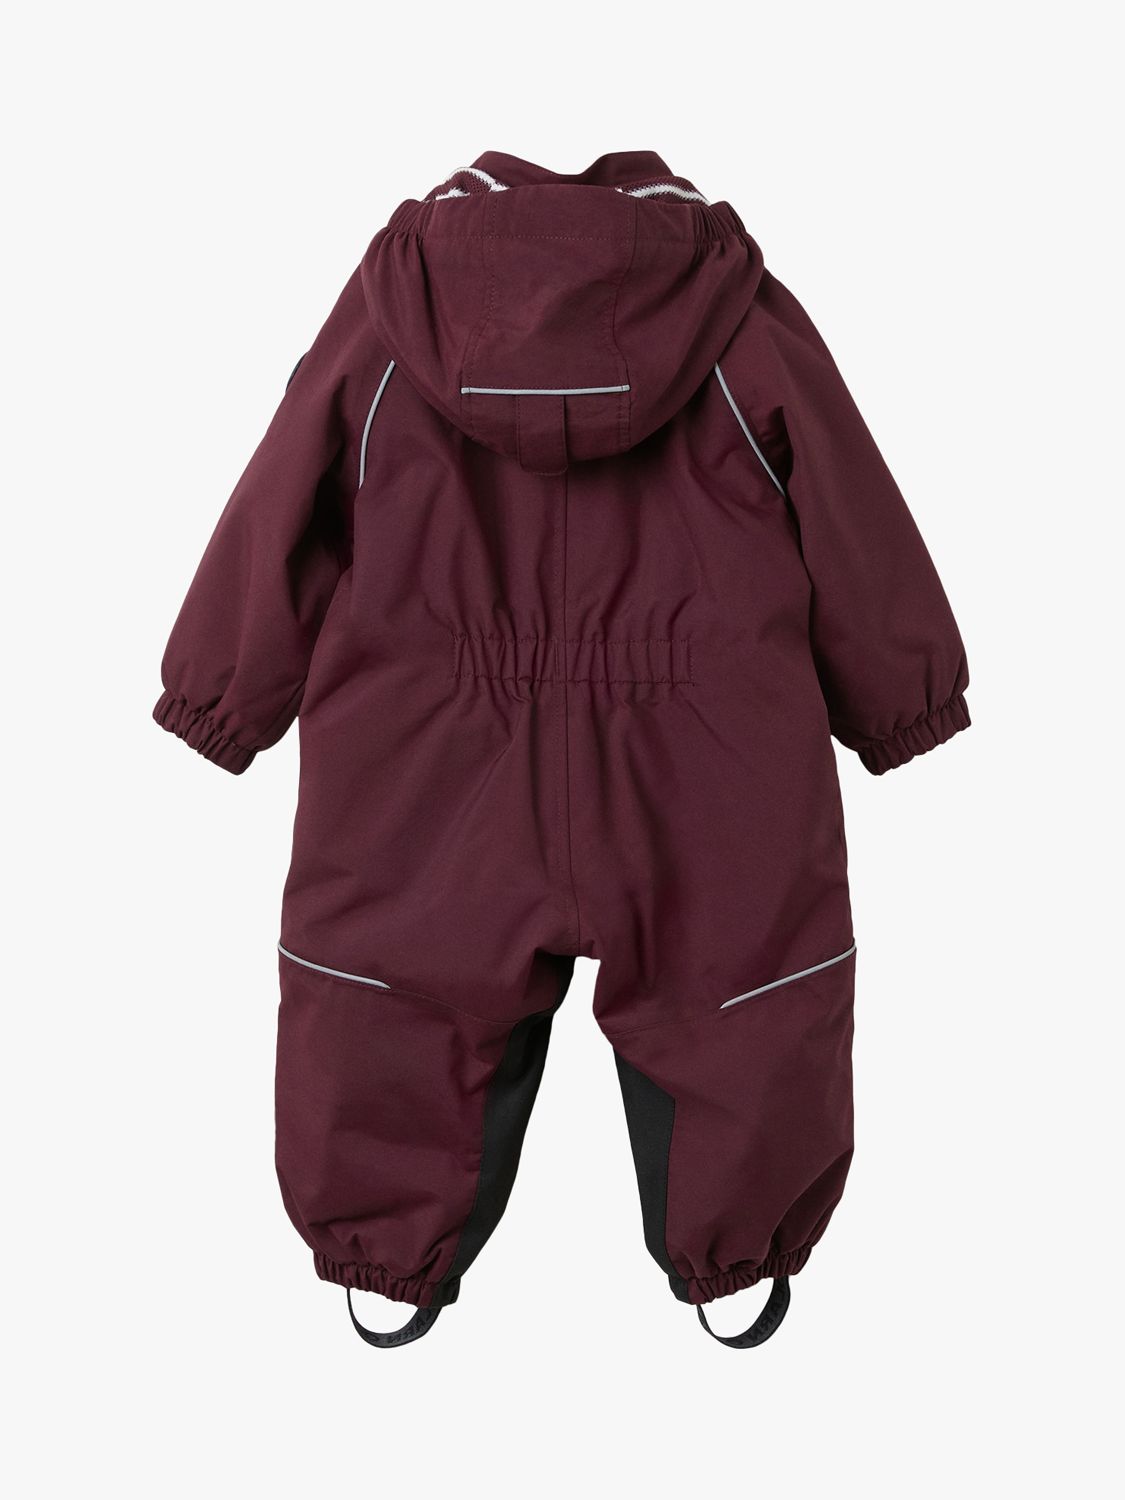 Buy Polarn O. Pyret Baby Shell Waterproof Overall Online at johnlewis.com